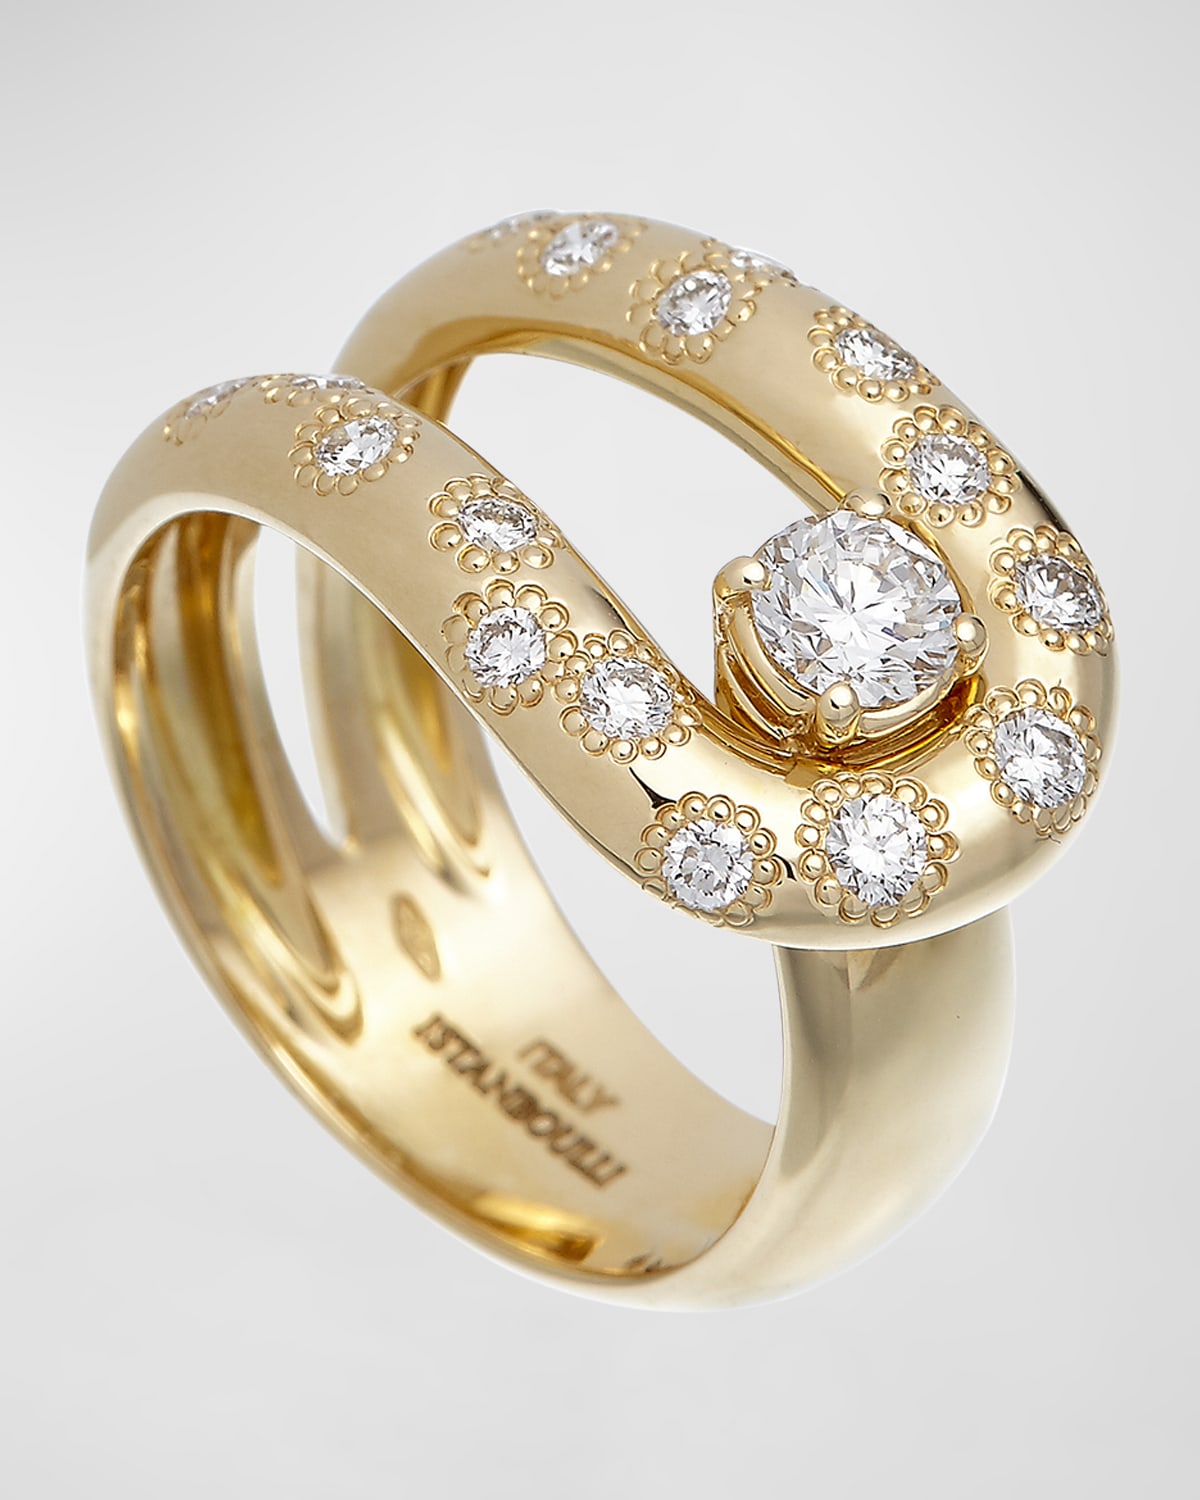 18K Yellow Gold Wide Ring with Diamonds, Size 7